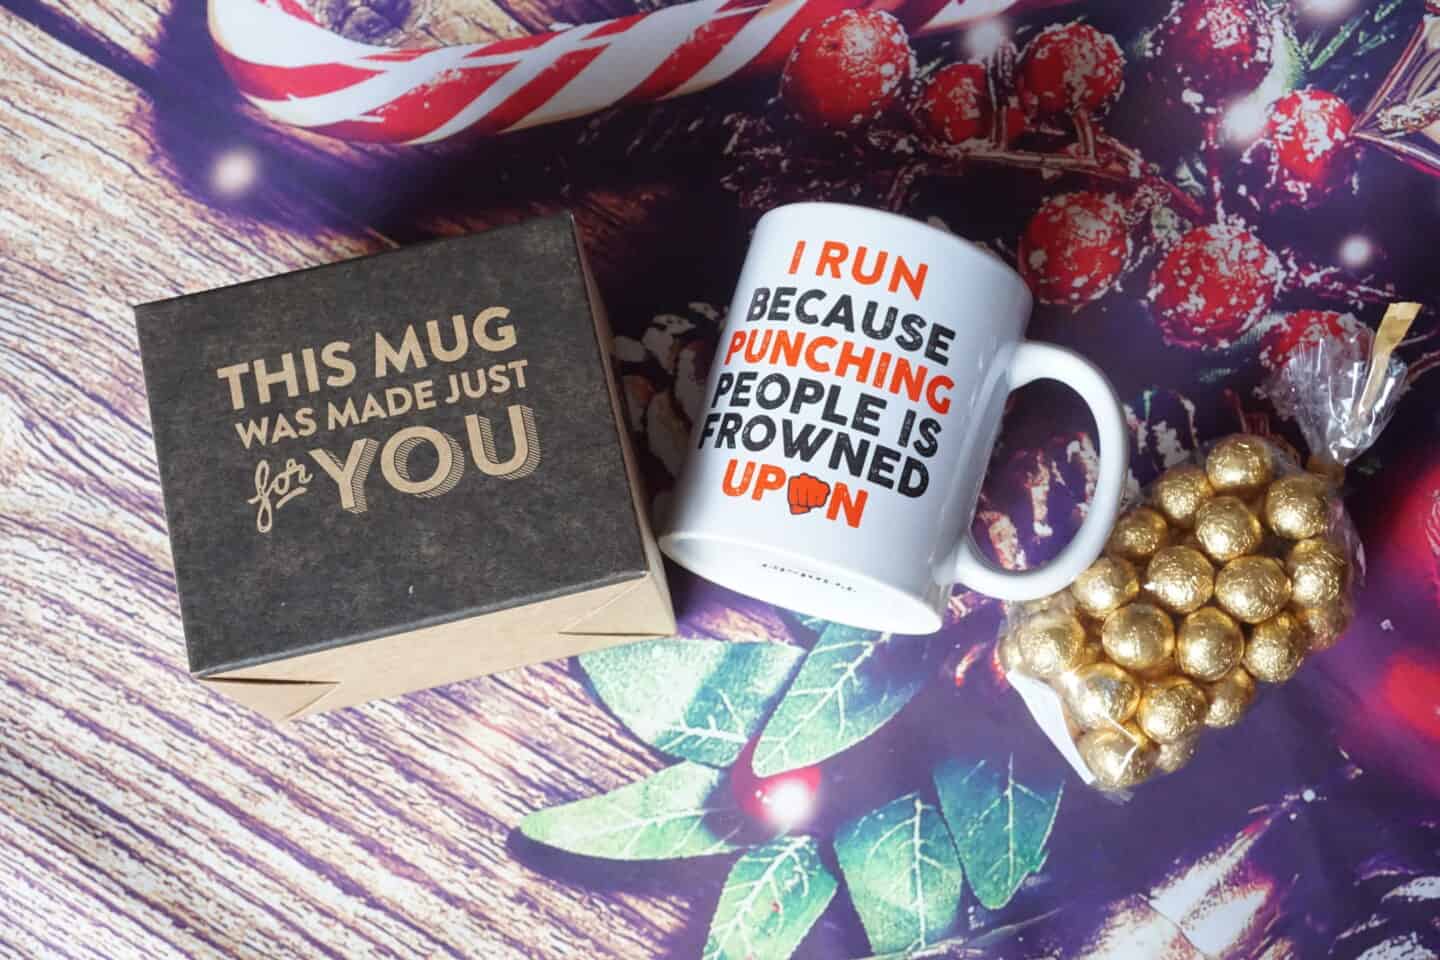 Christmas gift for a runner - mug with the words "I run because punching people is frowned upon" with gift box and chocolates